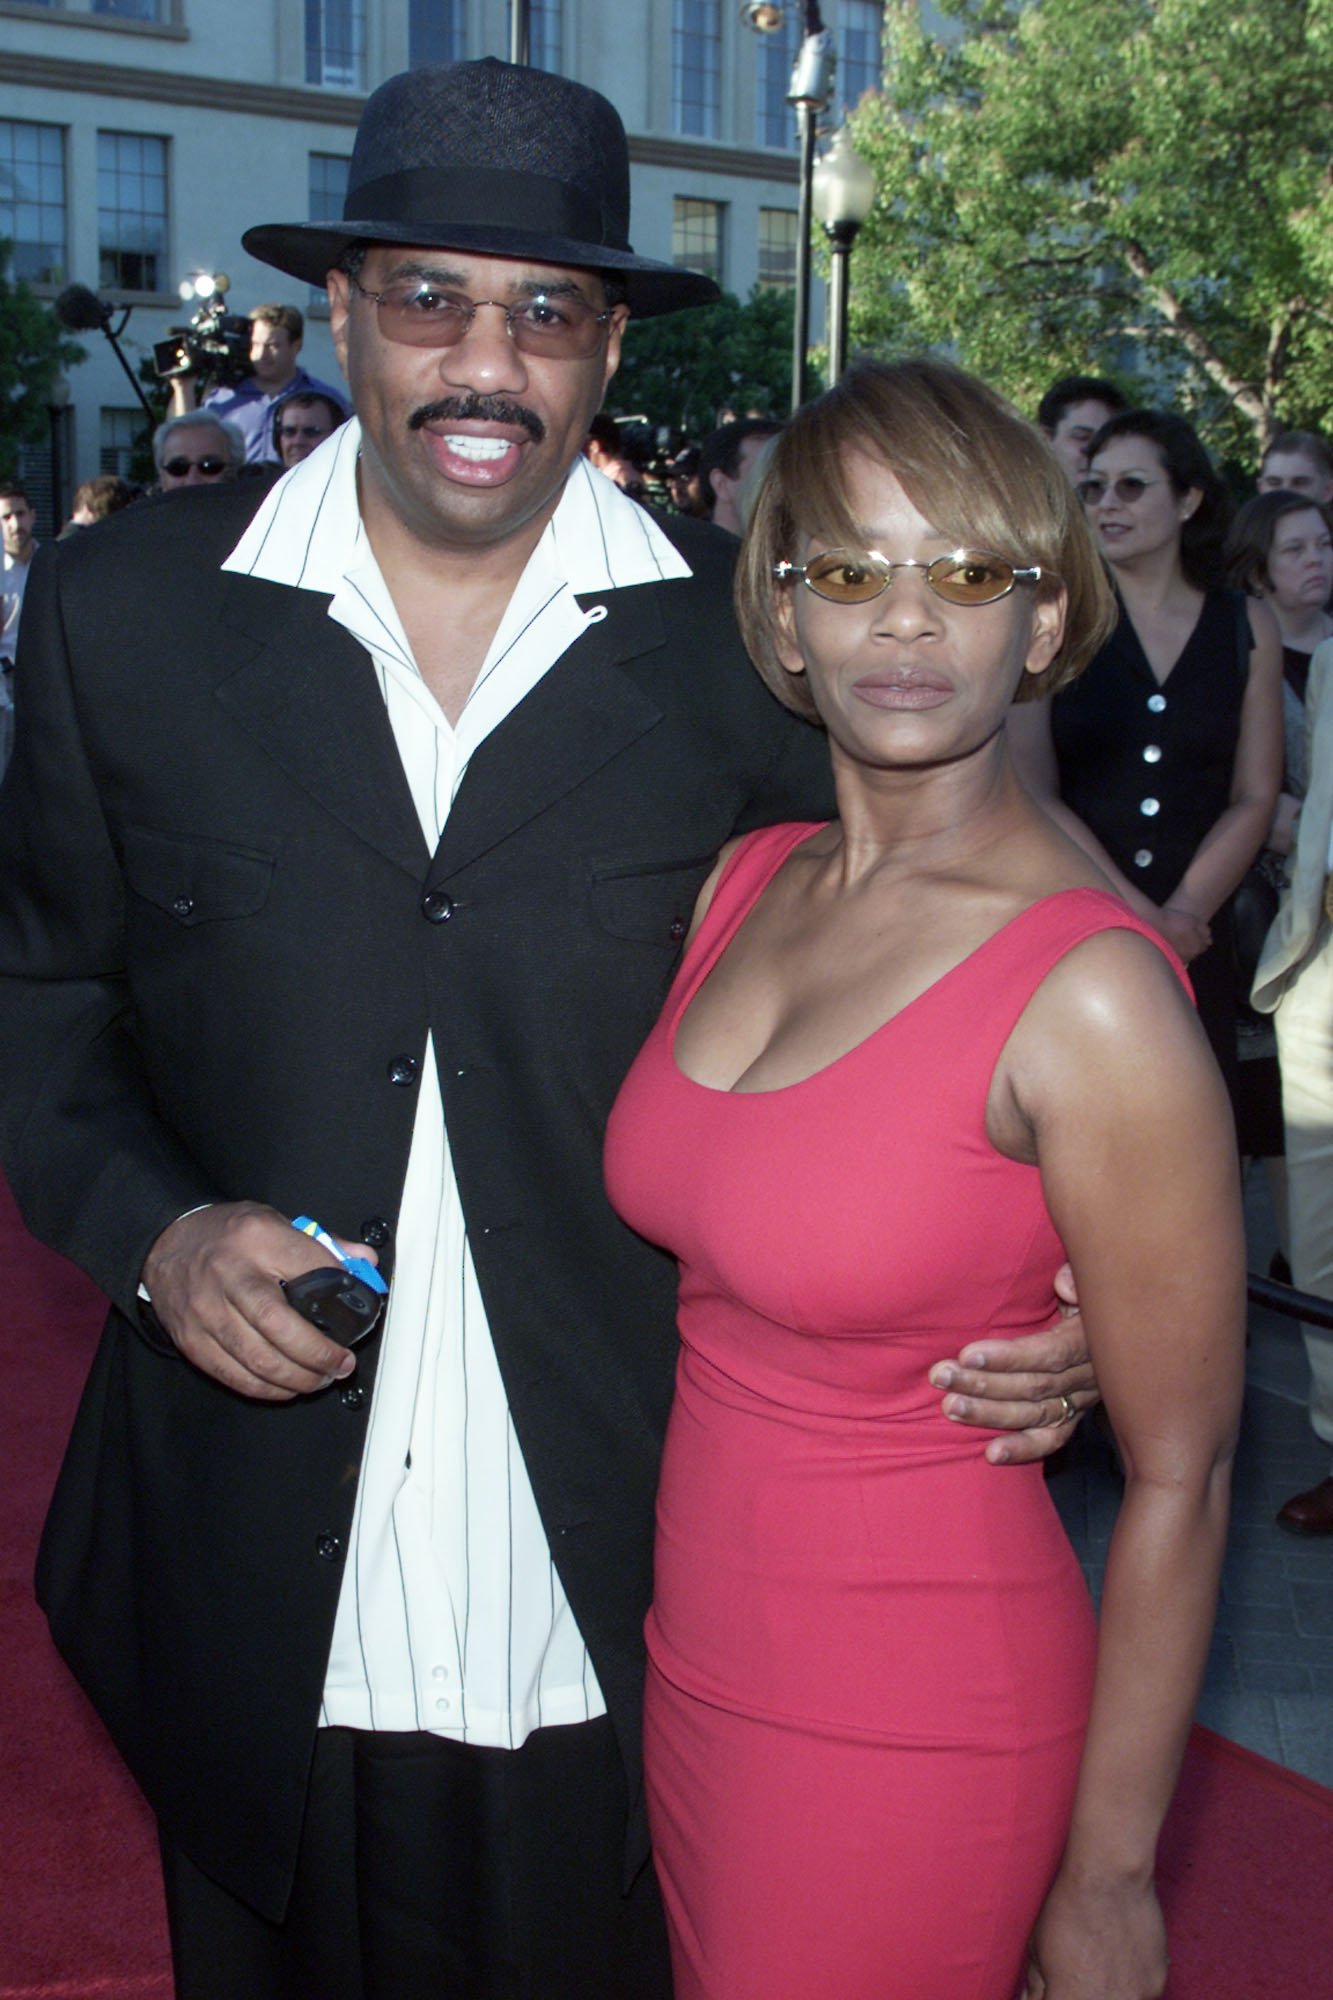 Steve Harvey and his wife Mary at the premiere of 'The Score' at the Paramount Theater in Los Angeles, CA on July 9, 2001 | Source: Getty Images 